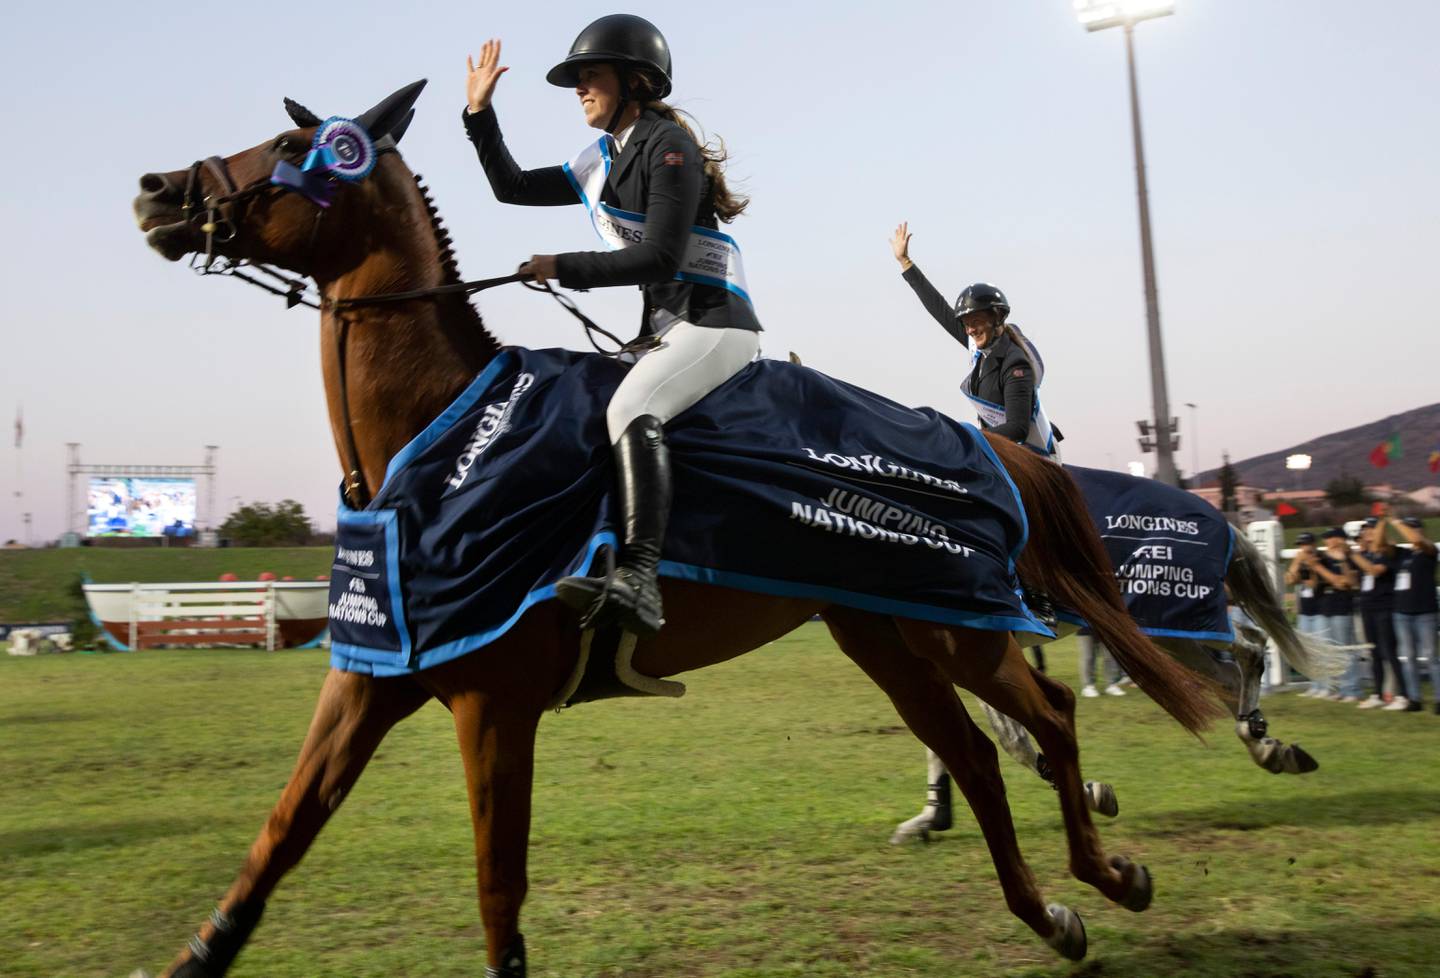 Victoria Gulliksen of Norway rides Papa Roach (L) next to Hege C Tidemandsen of Norway riding Carvis as the Norwegian equestrian team makes a victory lap after winning the Longines FEI Jumping Nations Cup of Greece in the Markopoulo Olympic Stadium Equestrian Center in Markopoulo, Greece, 28 July 2019. Norway won the event and Portugal came in second.